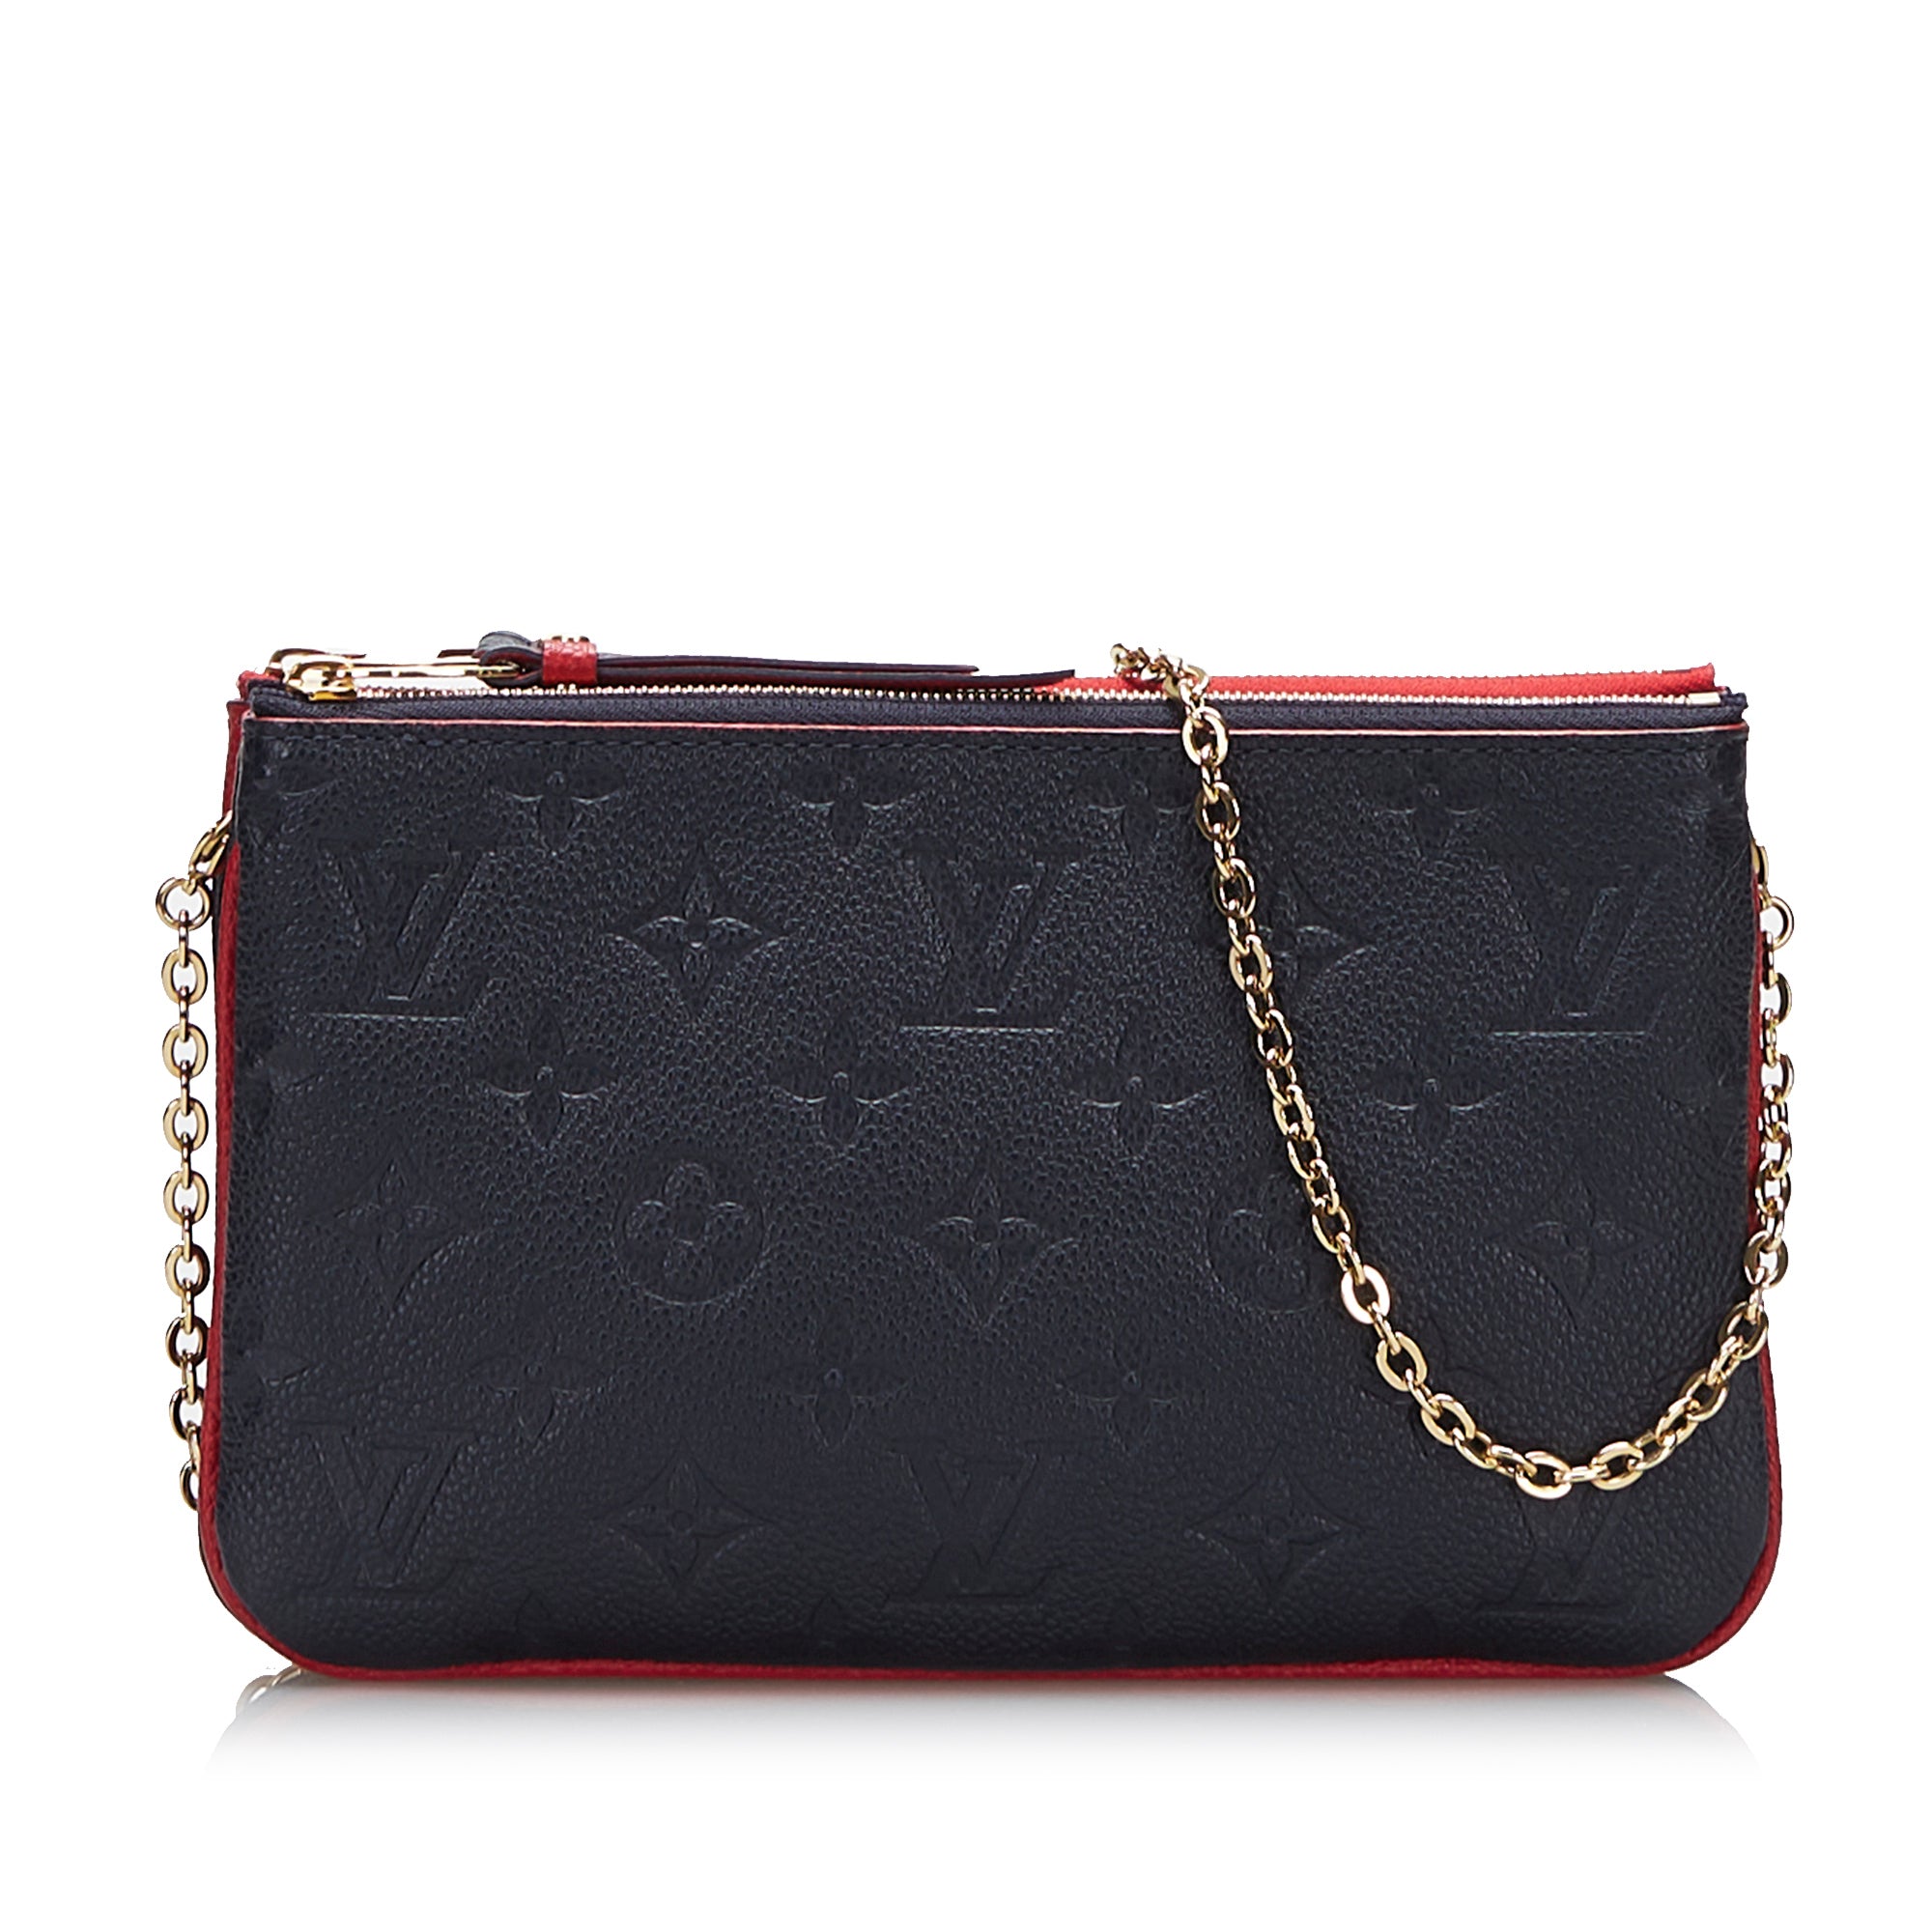 5 Reasons You NEED the Louis Vuitton Double Zip Pochette